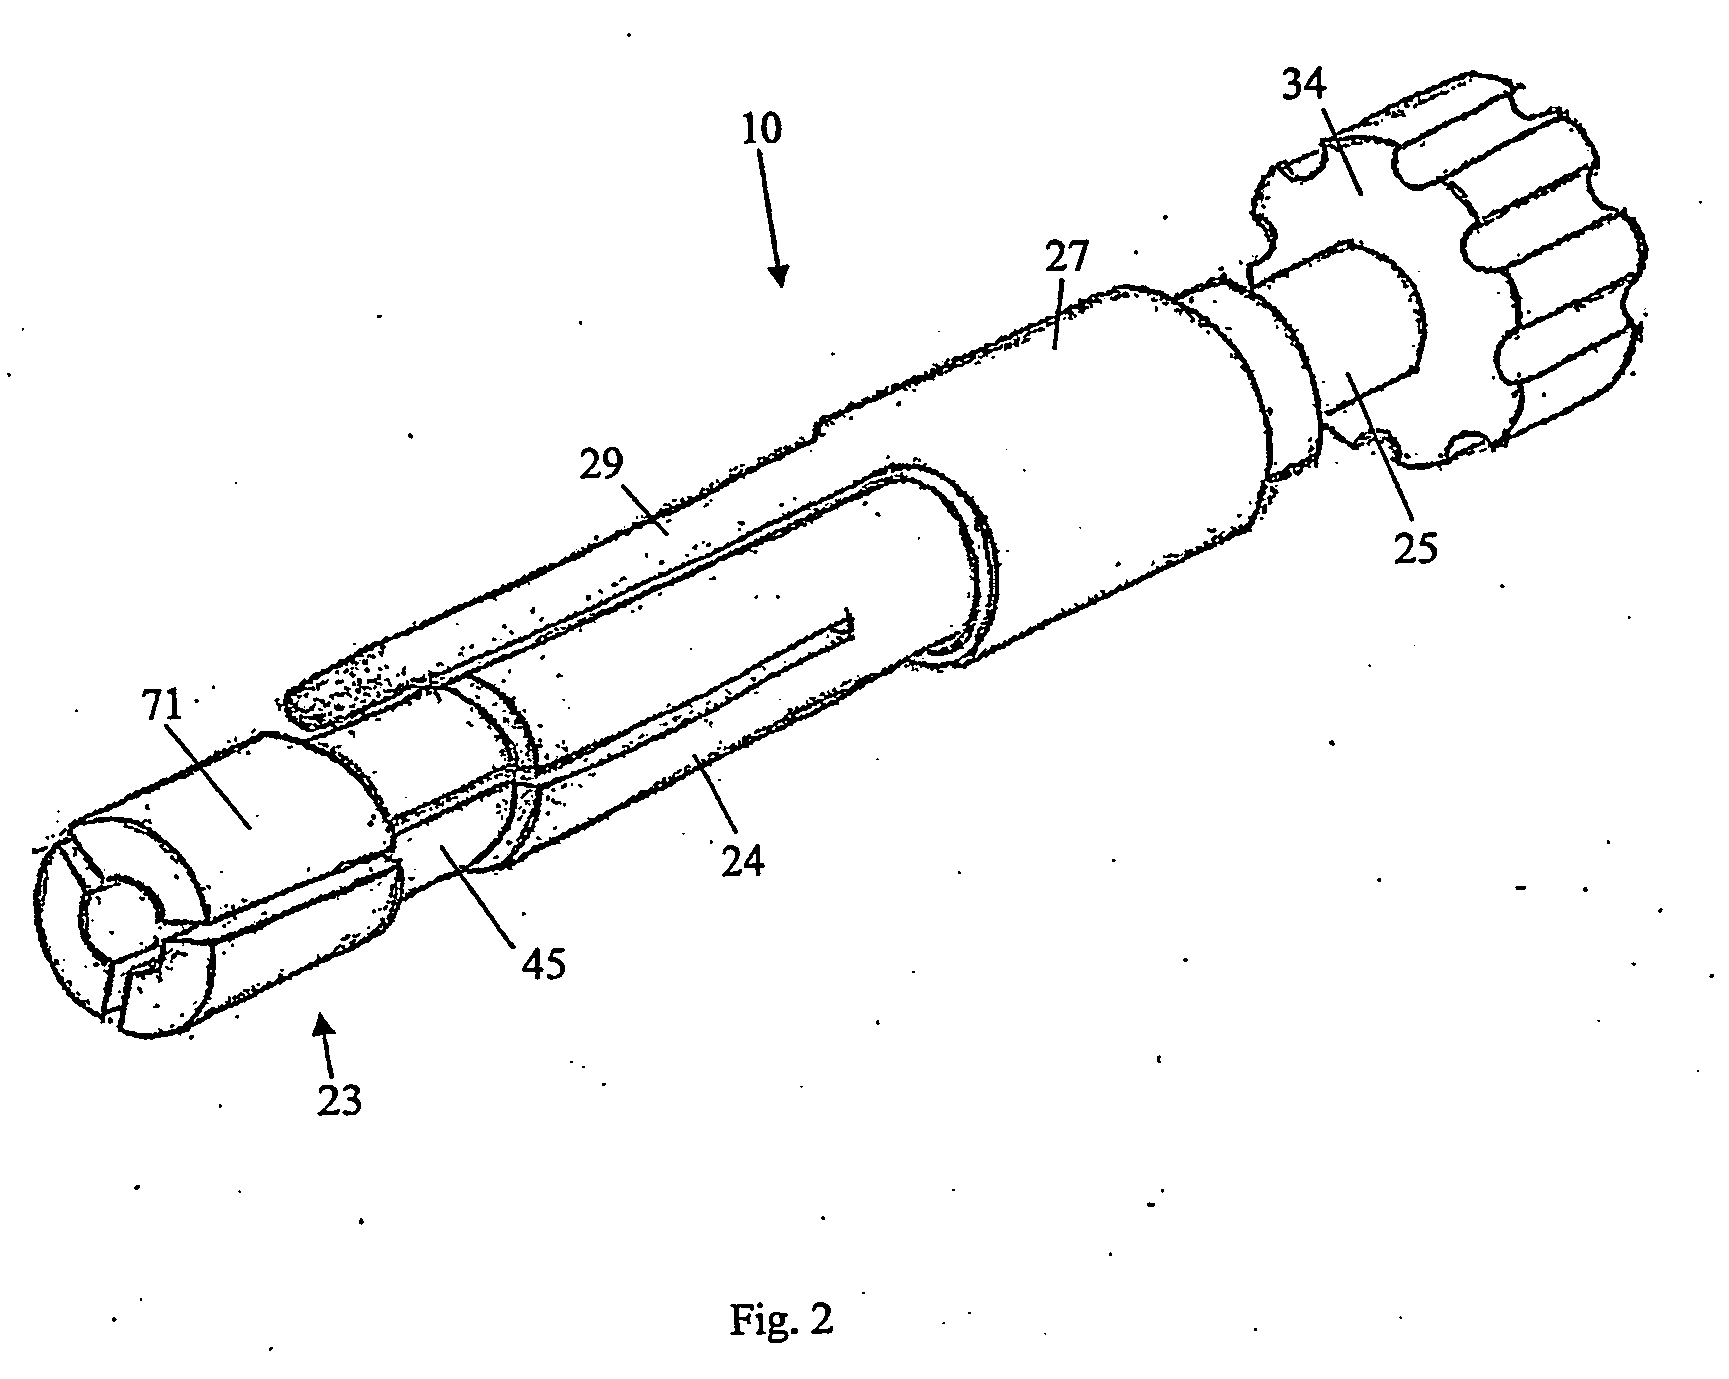 Device for Preparing Tissue for Anastomosis